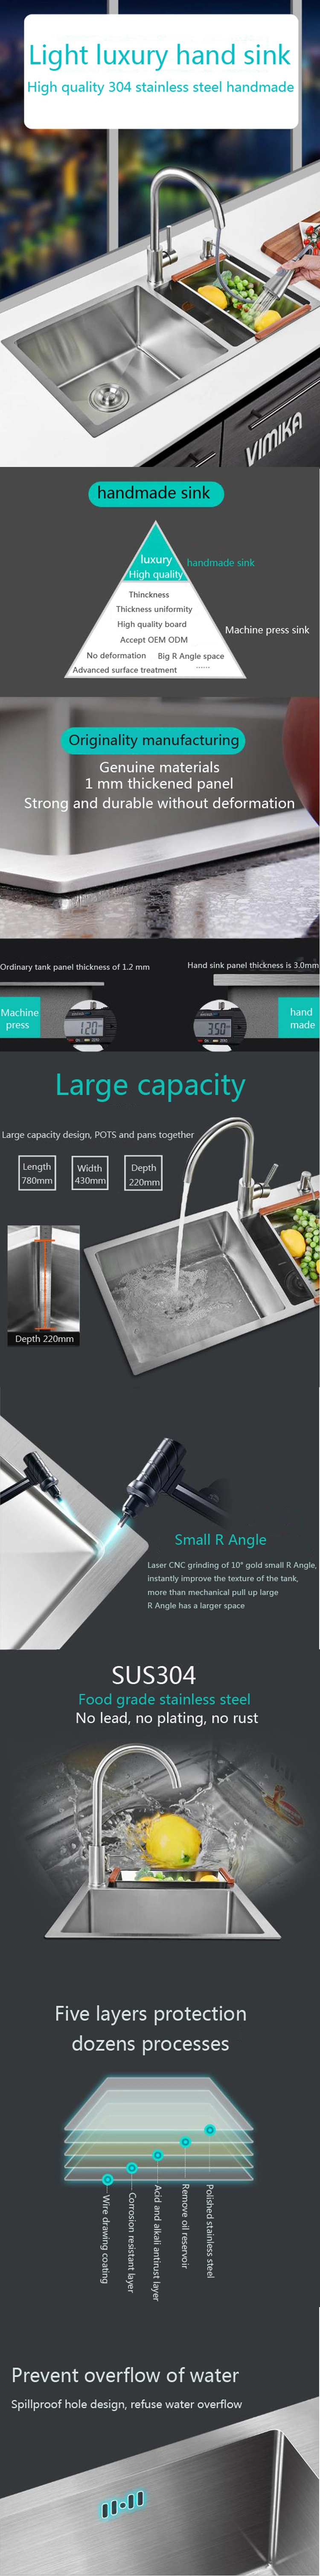 Special Promotions Stainless Steel Kitchen Sink Faucet Apron Sink Handmade Sink Bathroom Kitchen Accessories